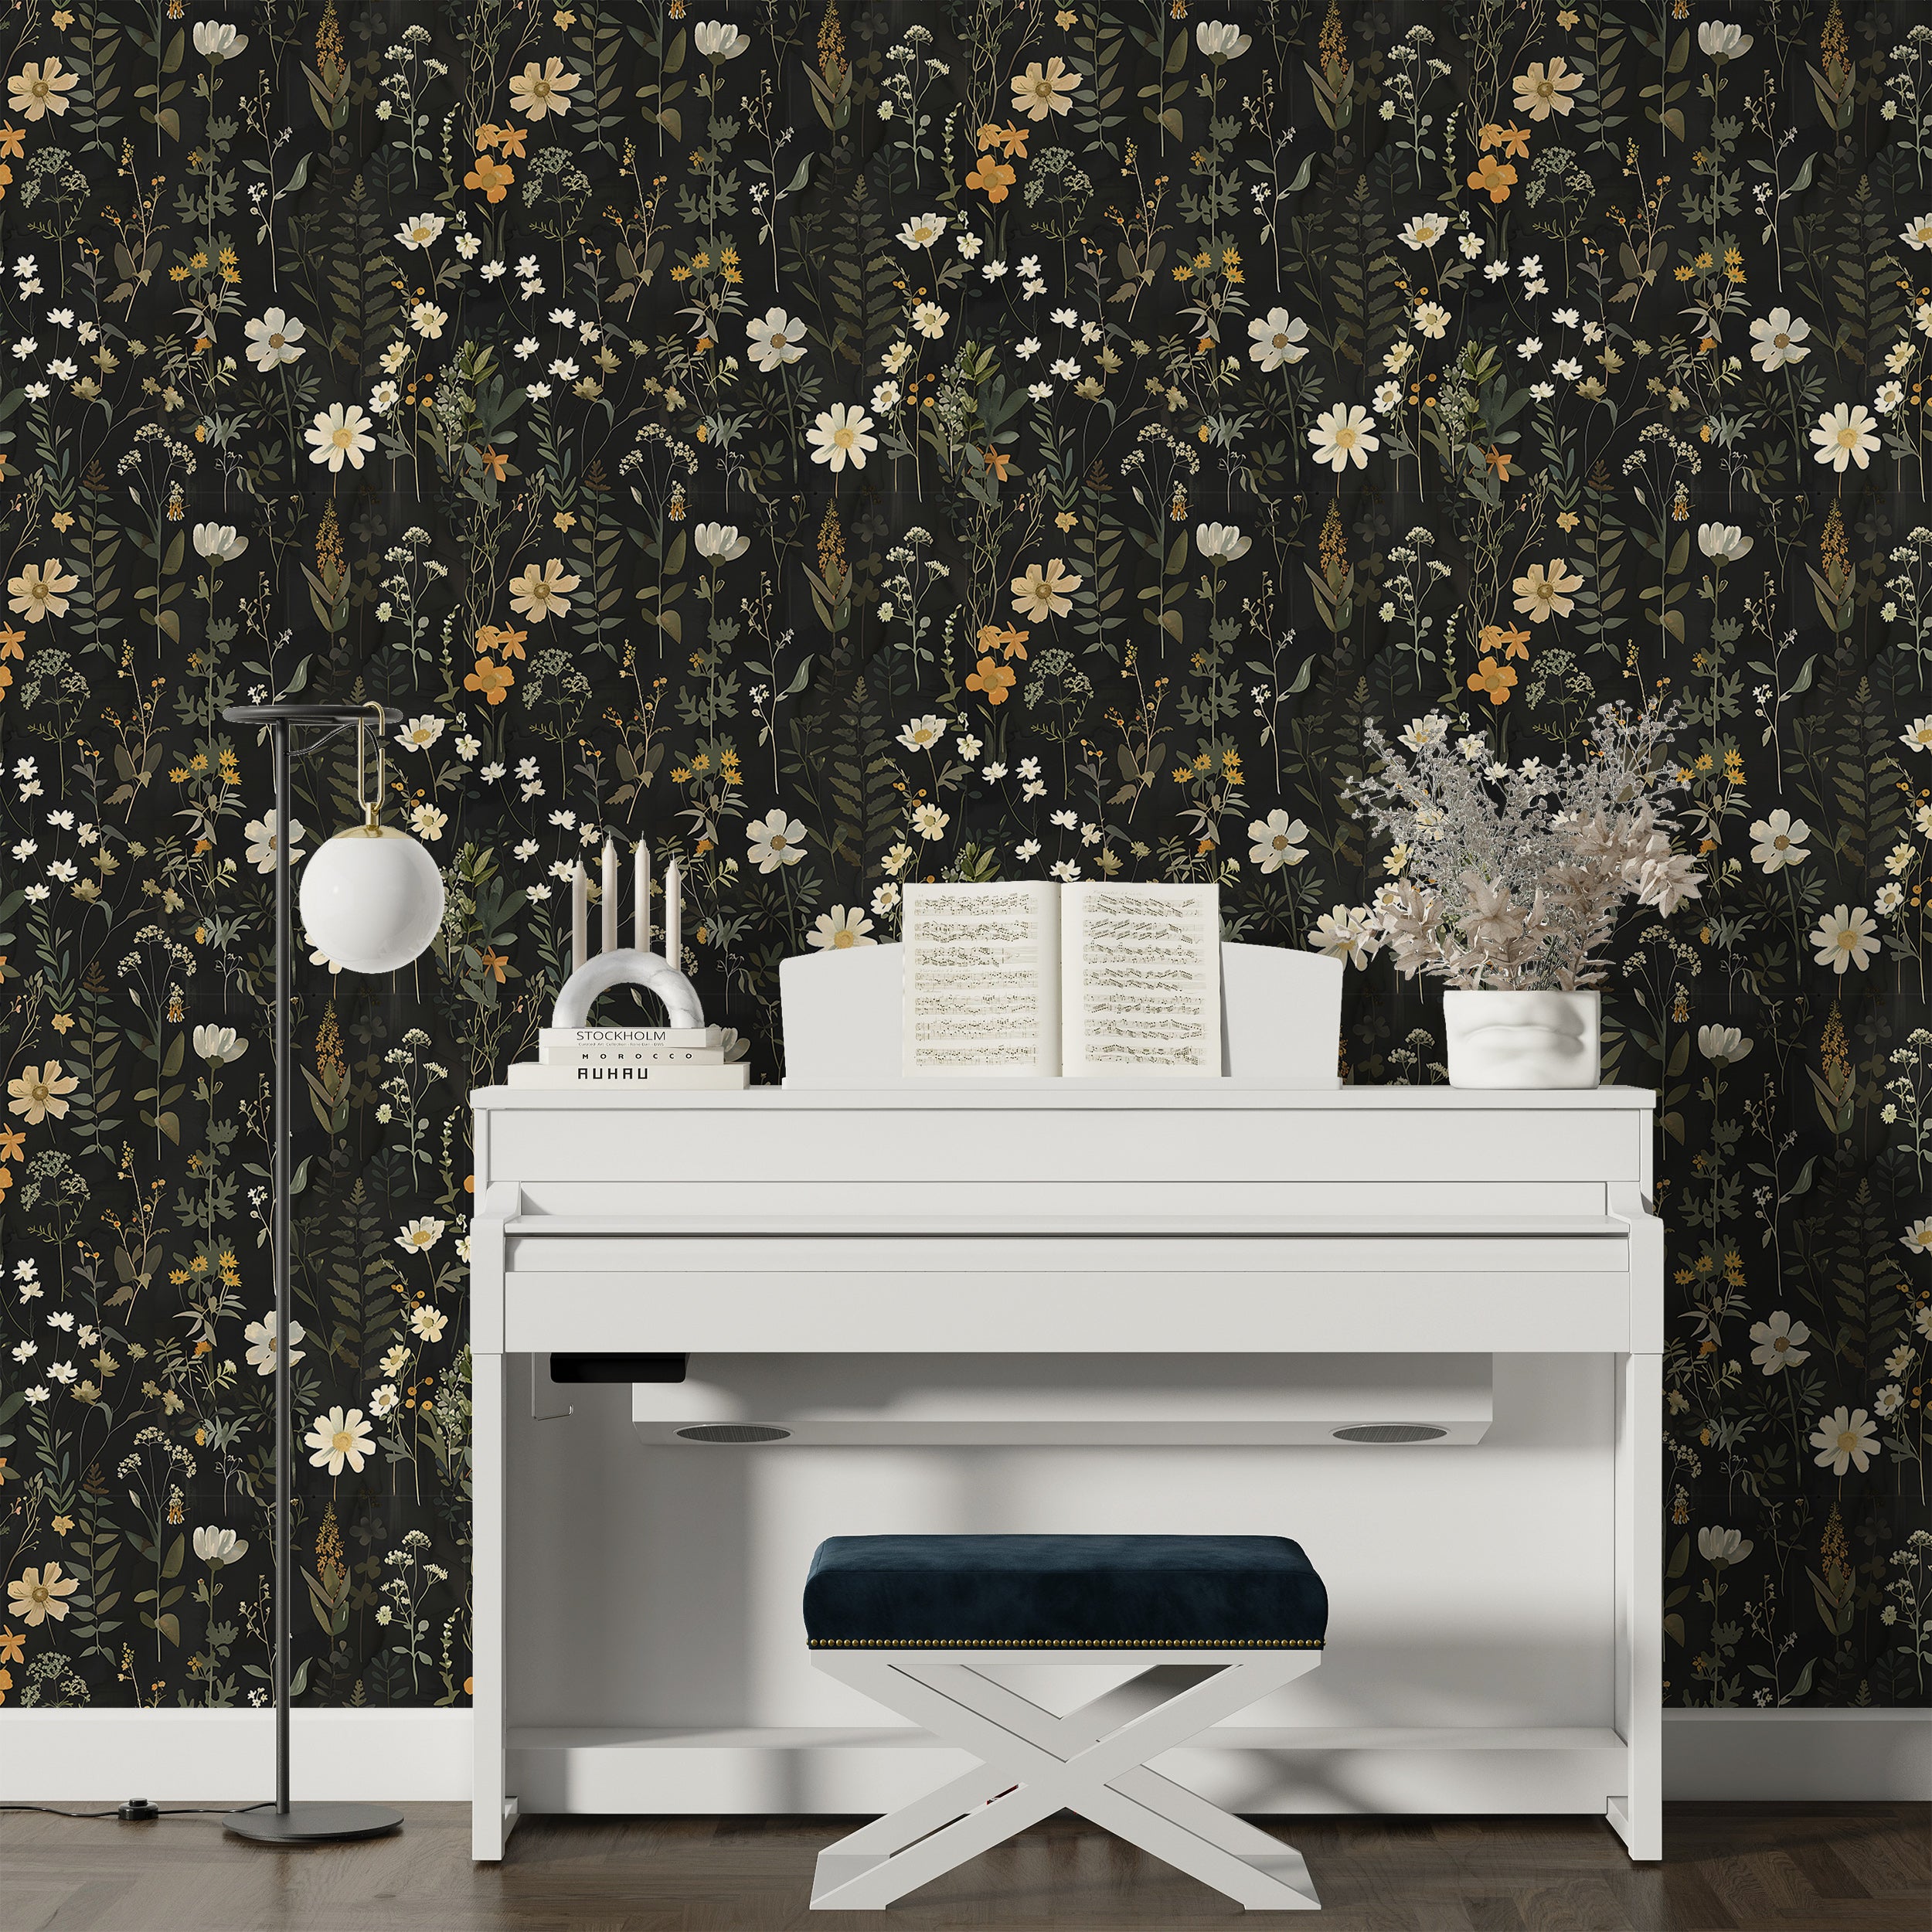 Meadow Flowers Dark Wallpaper, Fern Wall Decor, Peel and Stick Botanical, Dark Floral Decal, Removable Flower and Leaves on Black Background